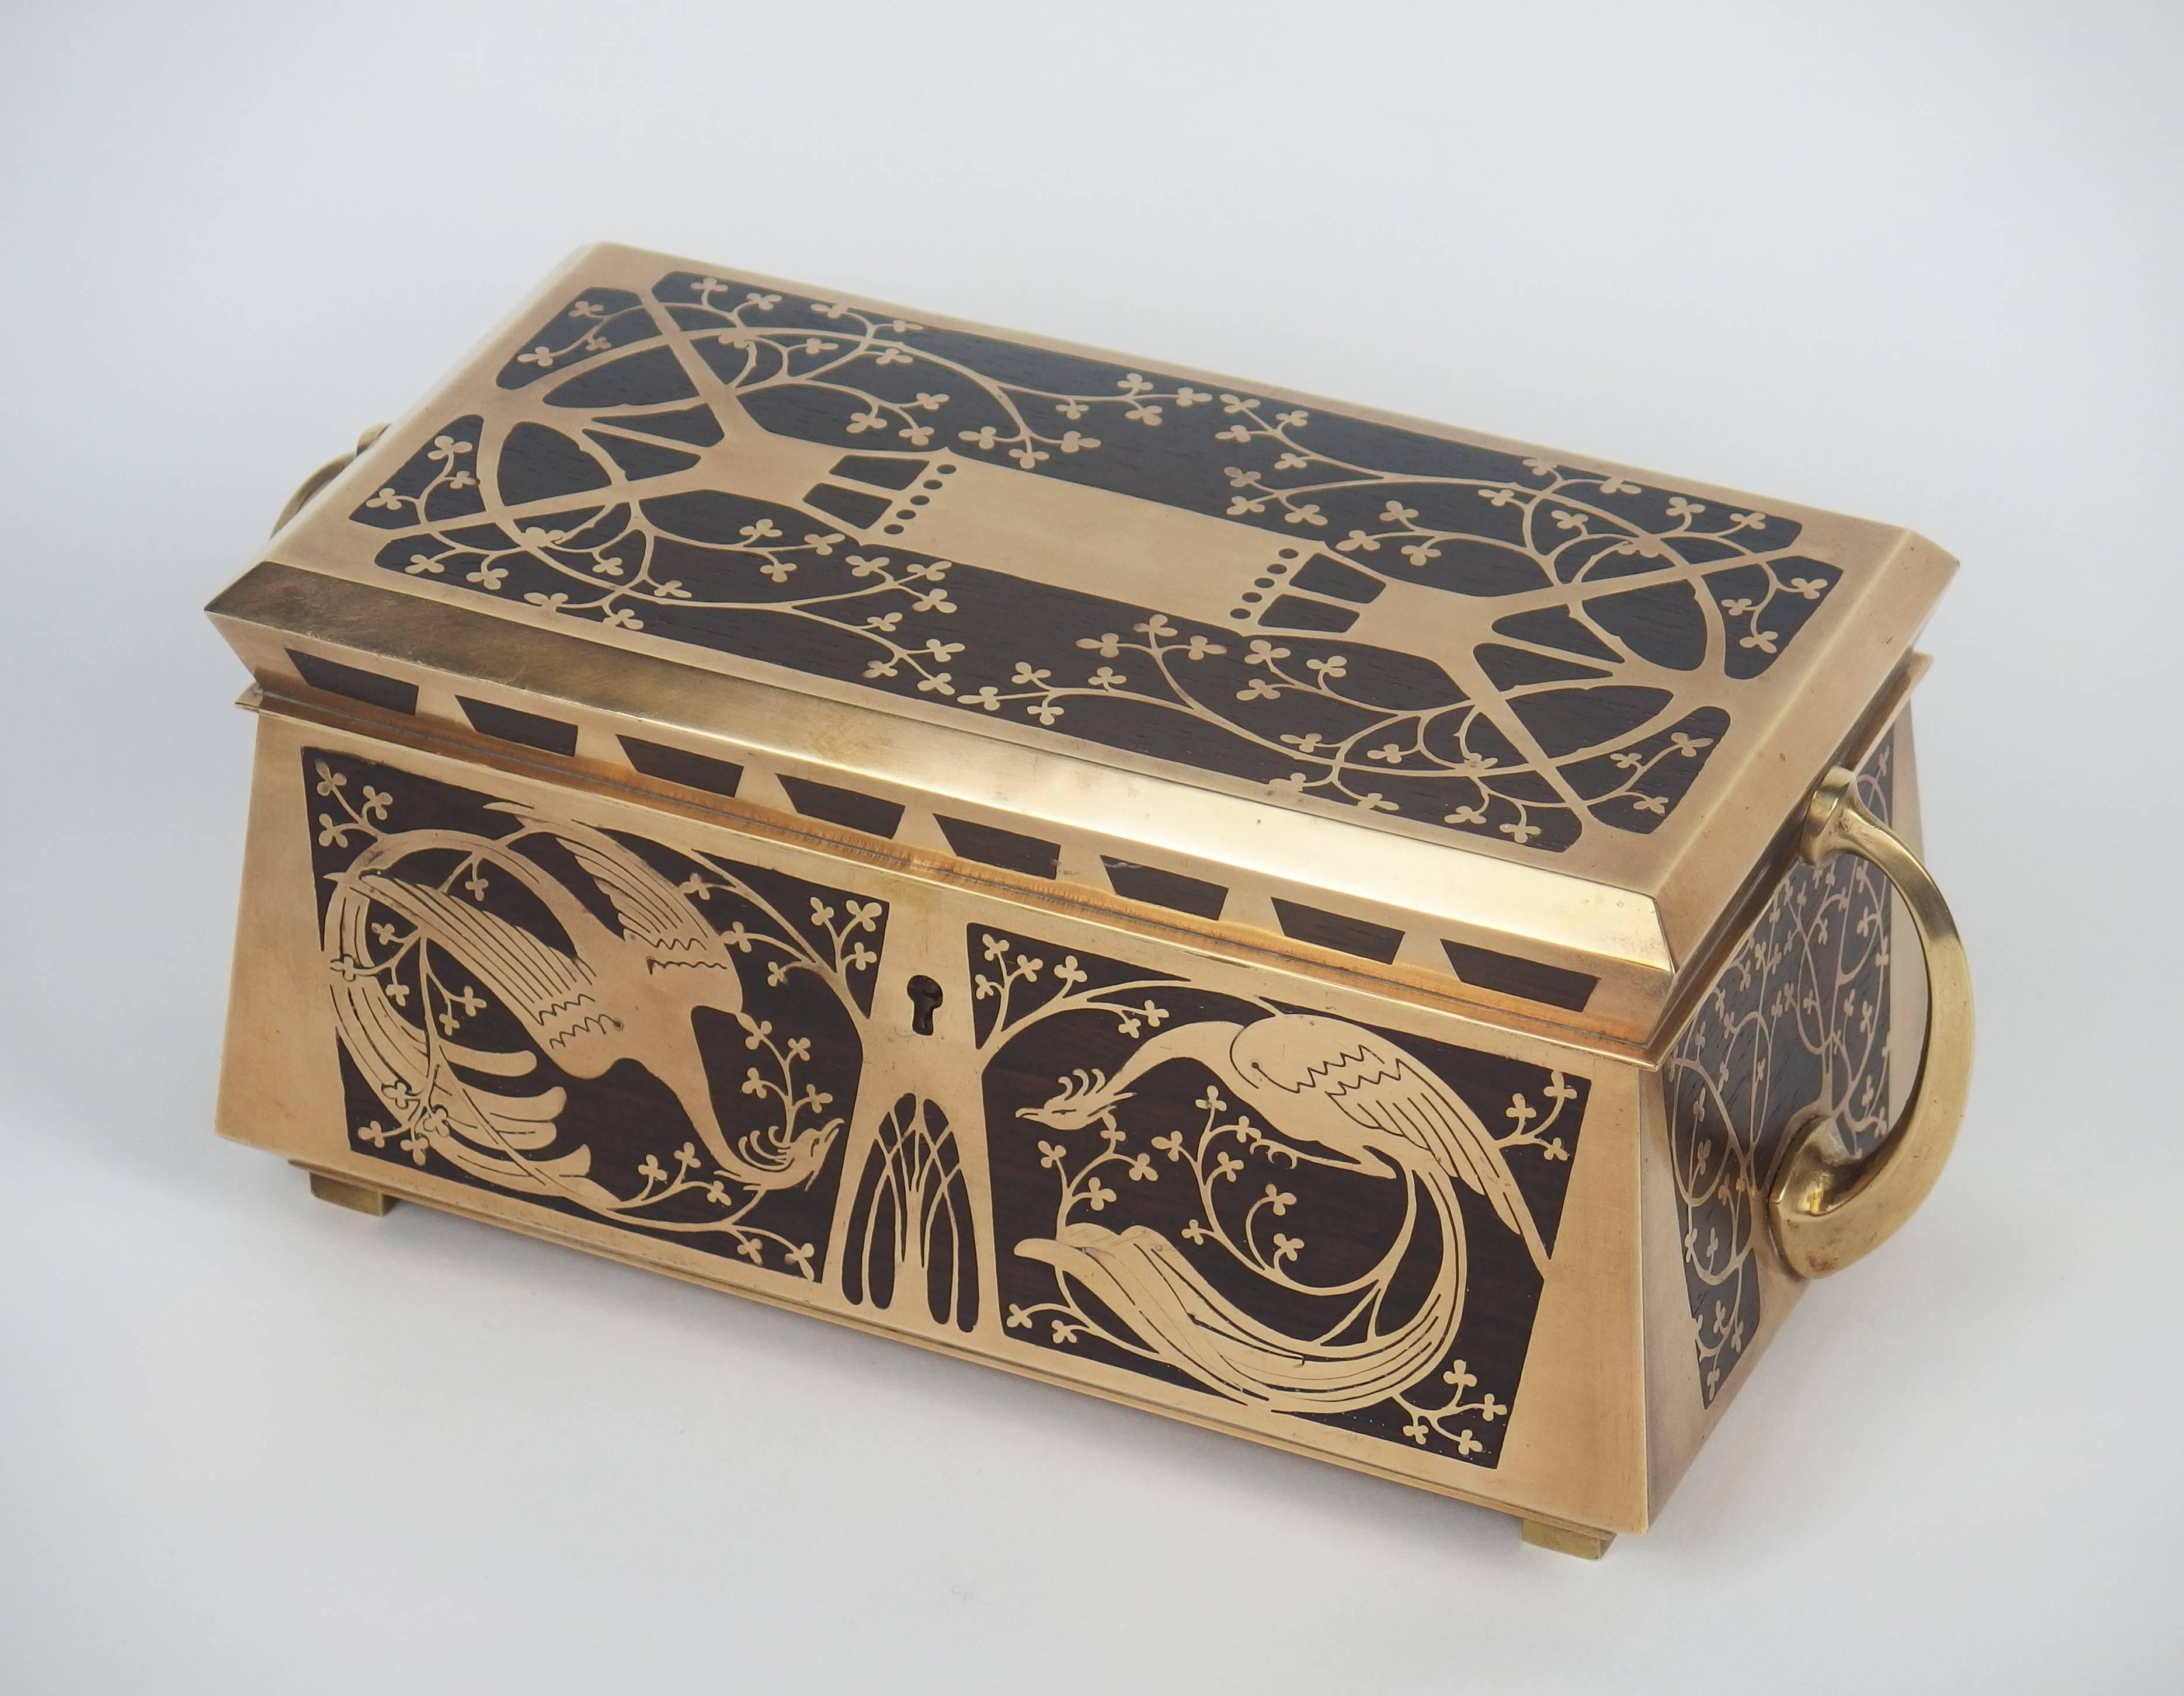 Inlay Jugendstil Jewelry Box by Erhard & Sohne